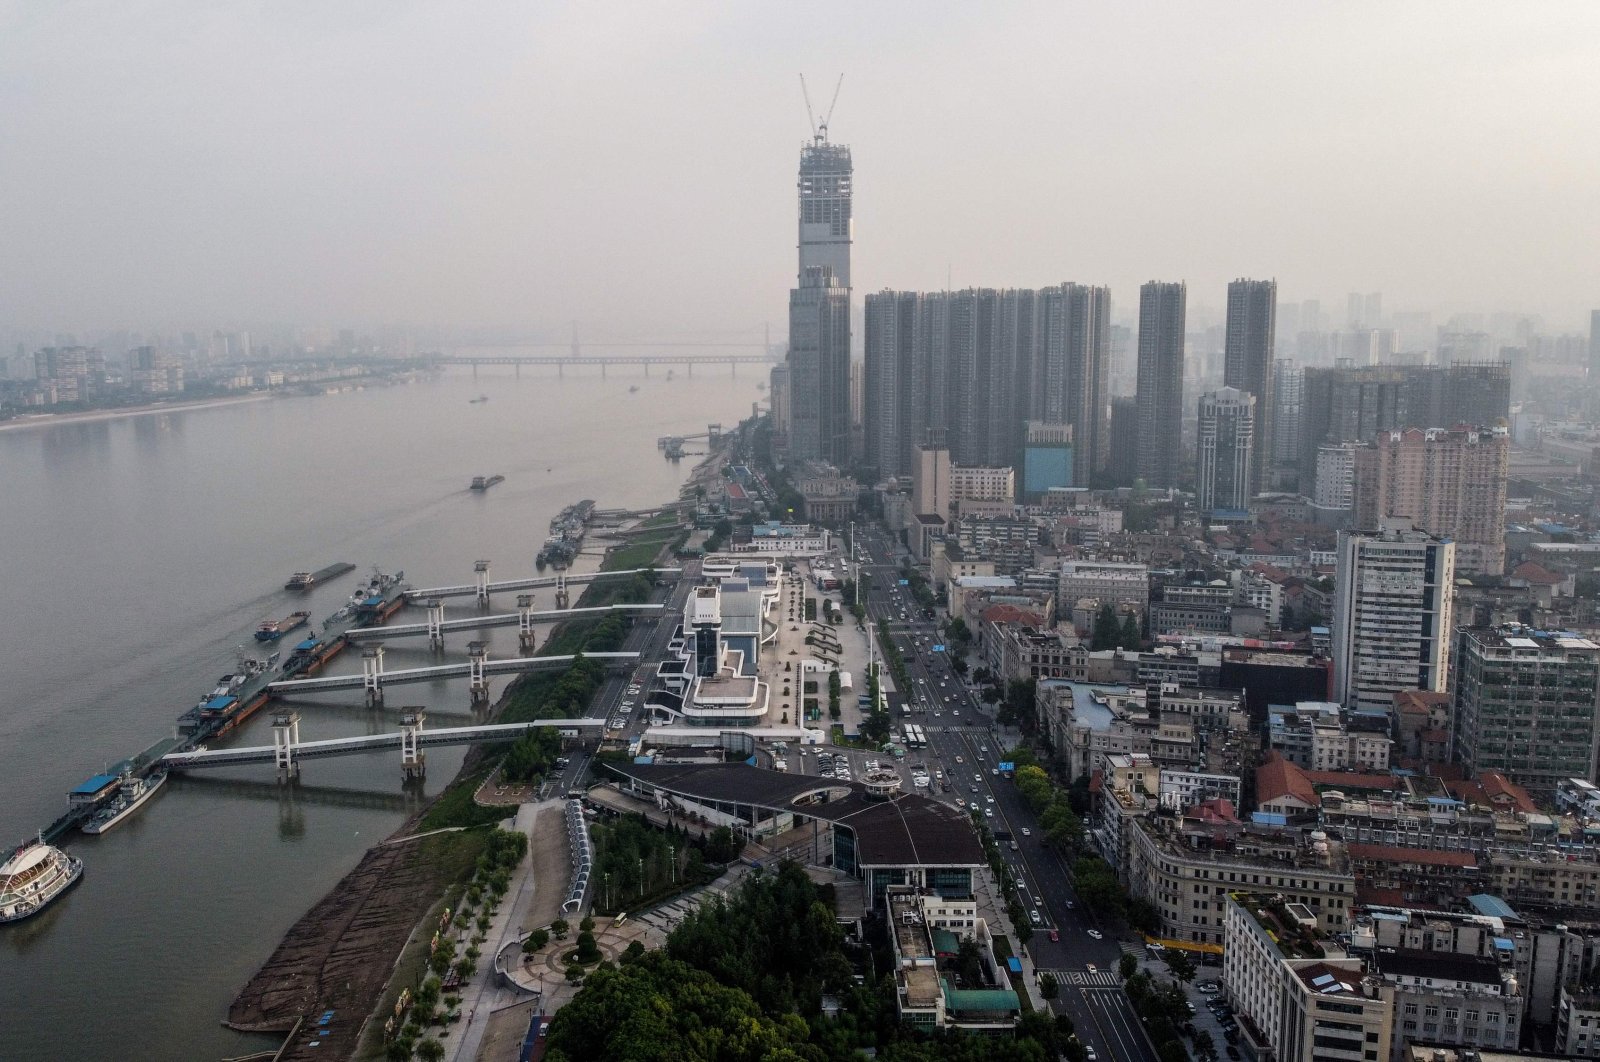 An aerial view shows the city of Wuhan, central Hubei province, China, May 15, 2020. (AFP Photo)